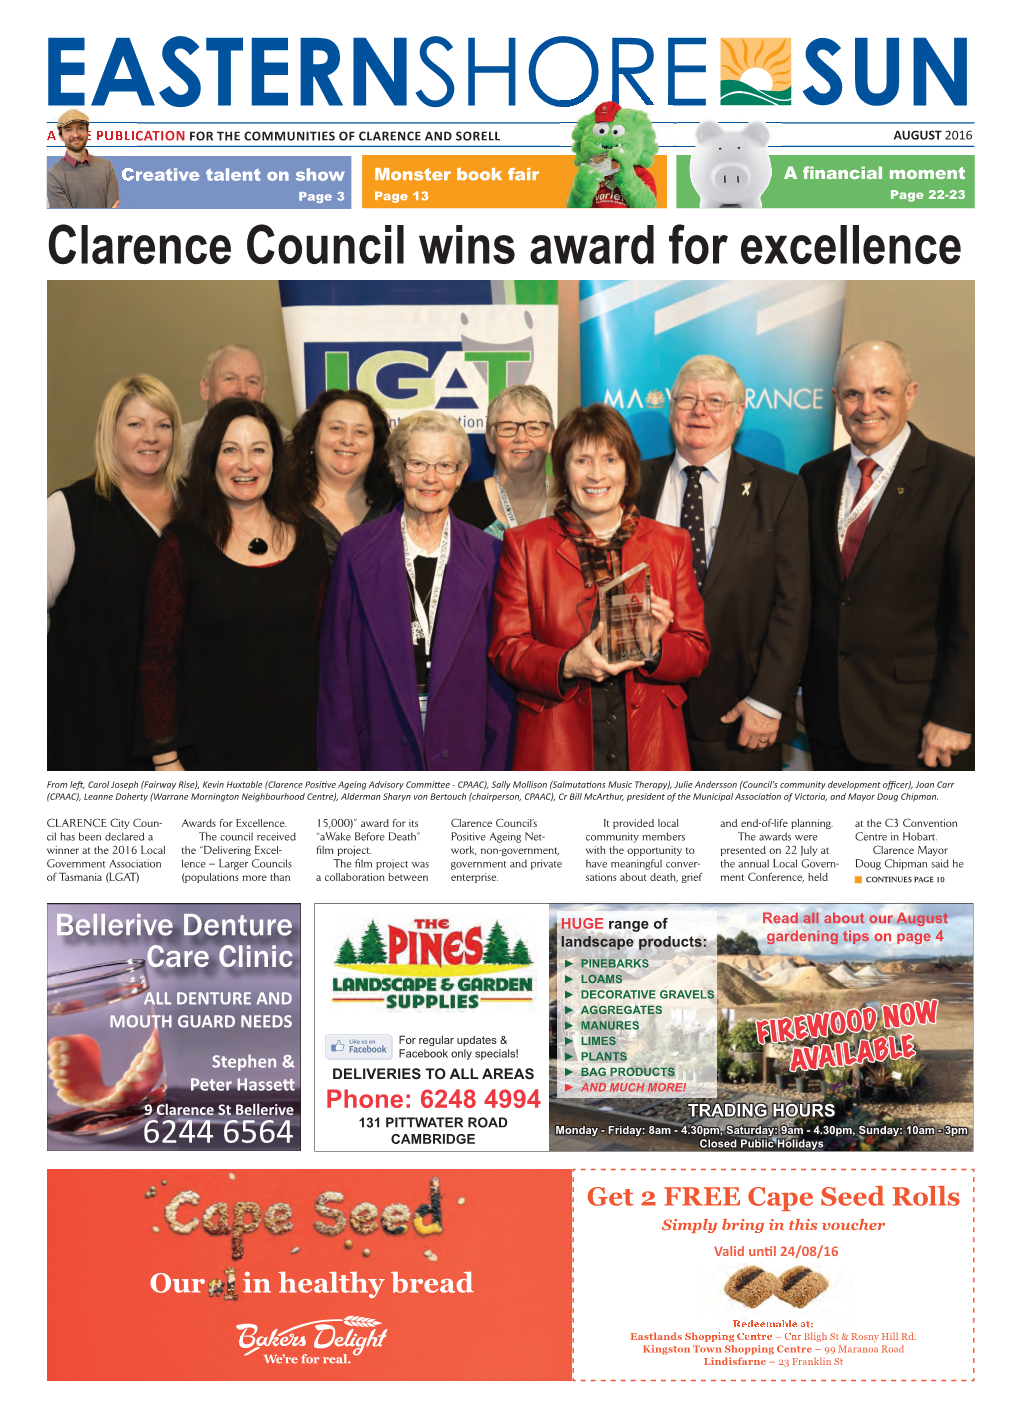 Clarence Council Wins Award for Excellence